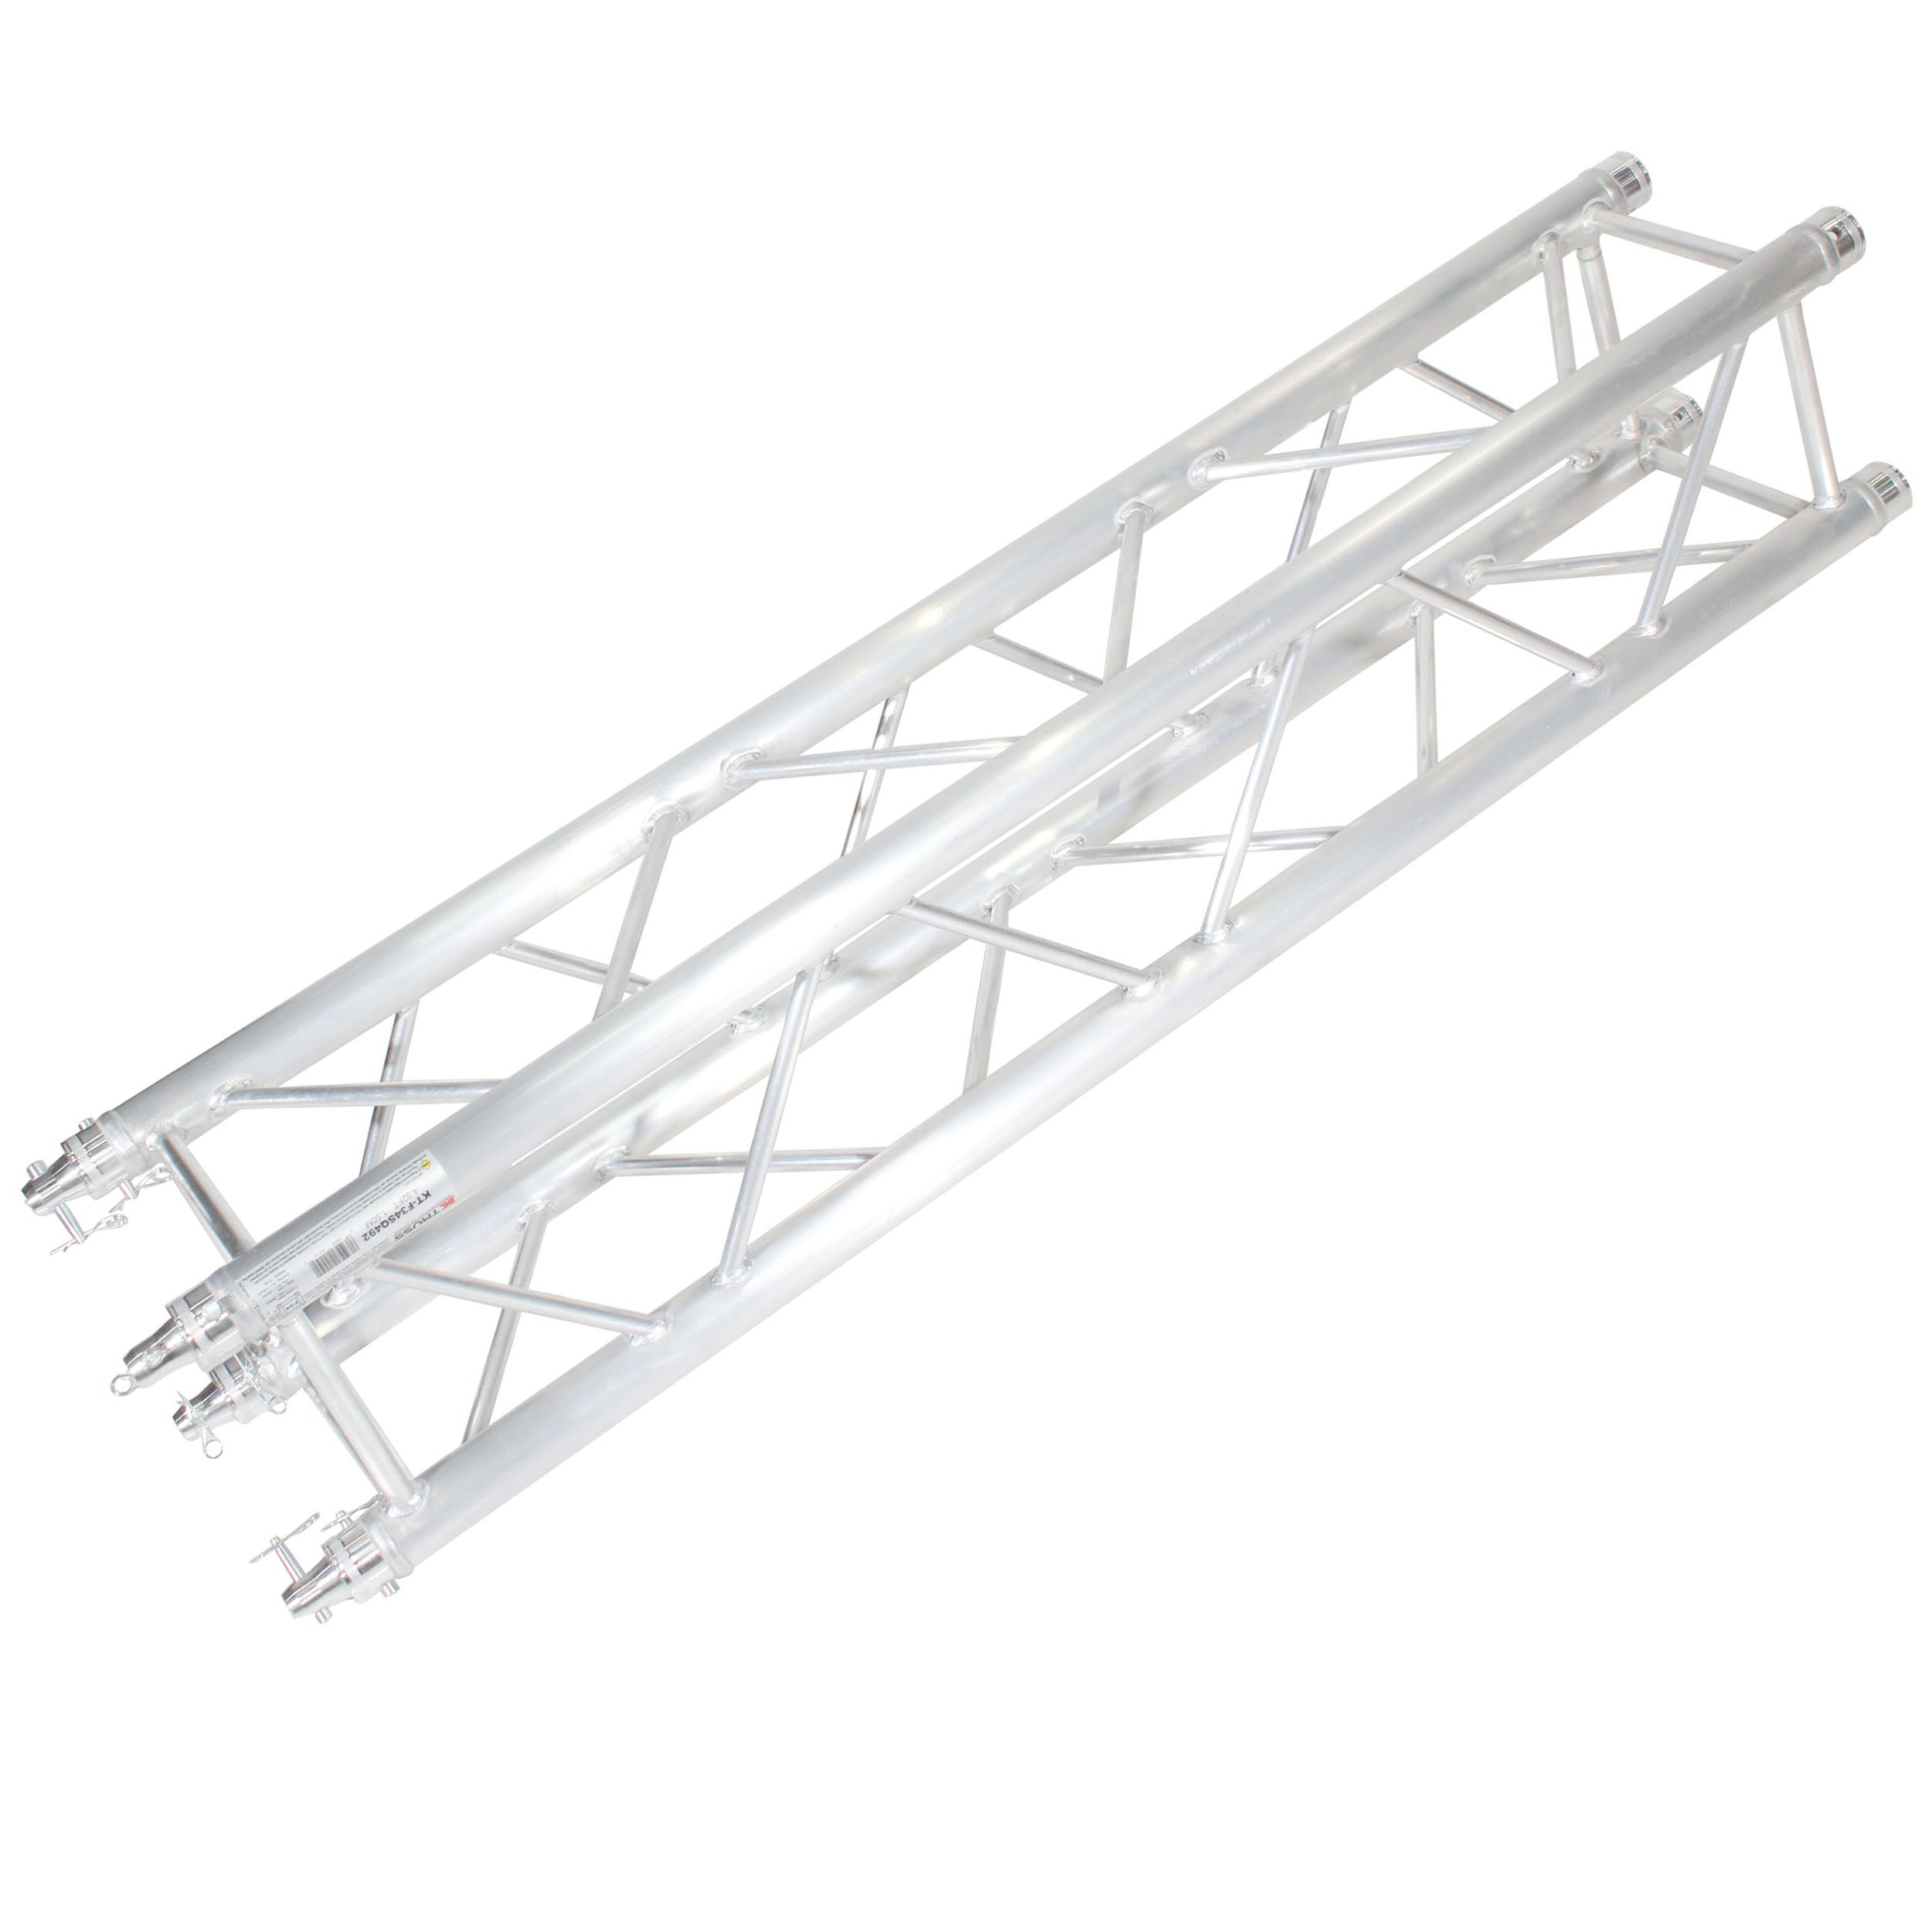 Pro X K-Truss 4.92 Lightweight Square Truss Totem Full Package Includes White Scrim, Top Plate and Base Plate KT-SQ492TOTEMTCX2